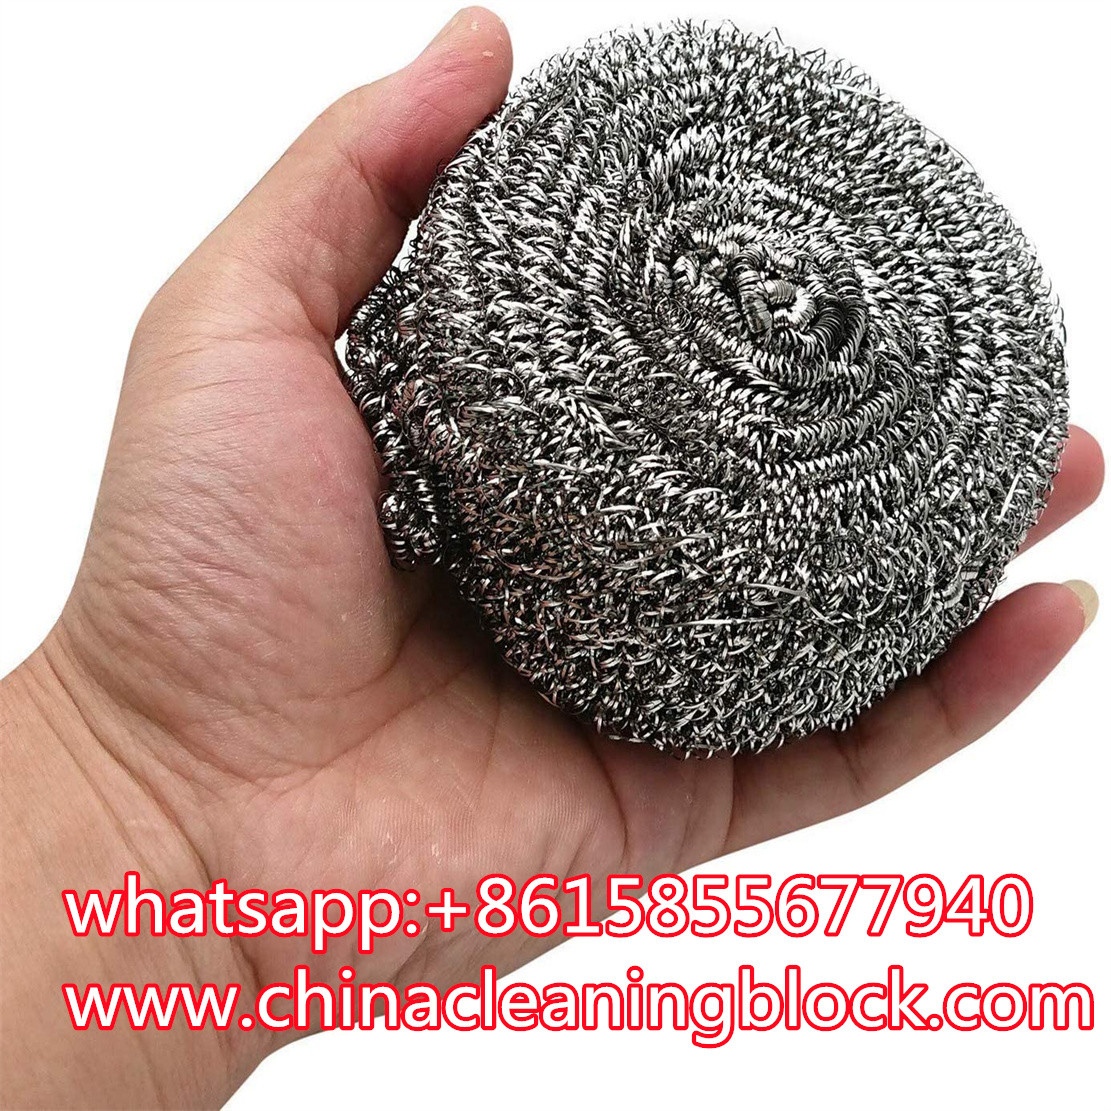 China Stainless Steel Heavy Weight Scouring Pads - 12/Pack wholesale